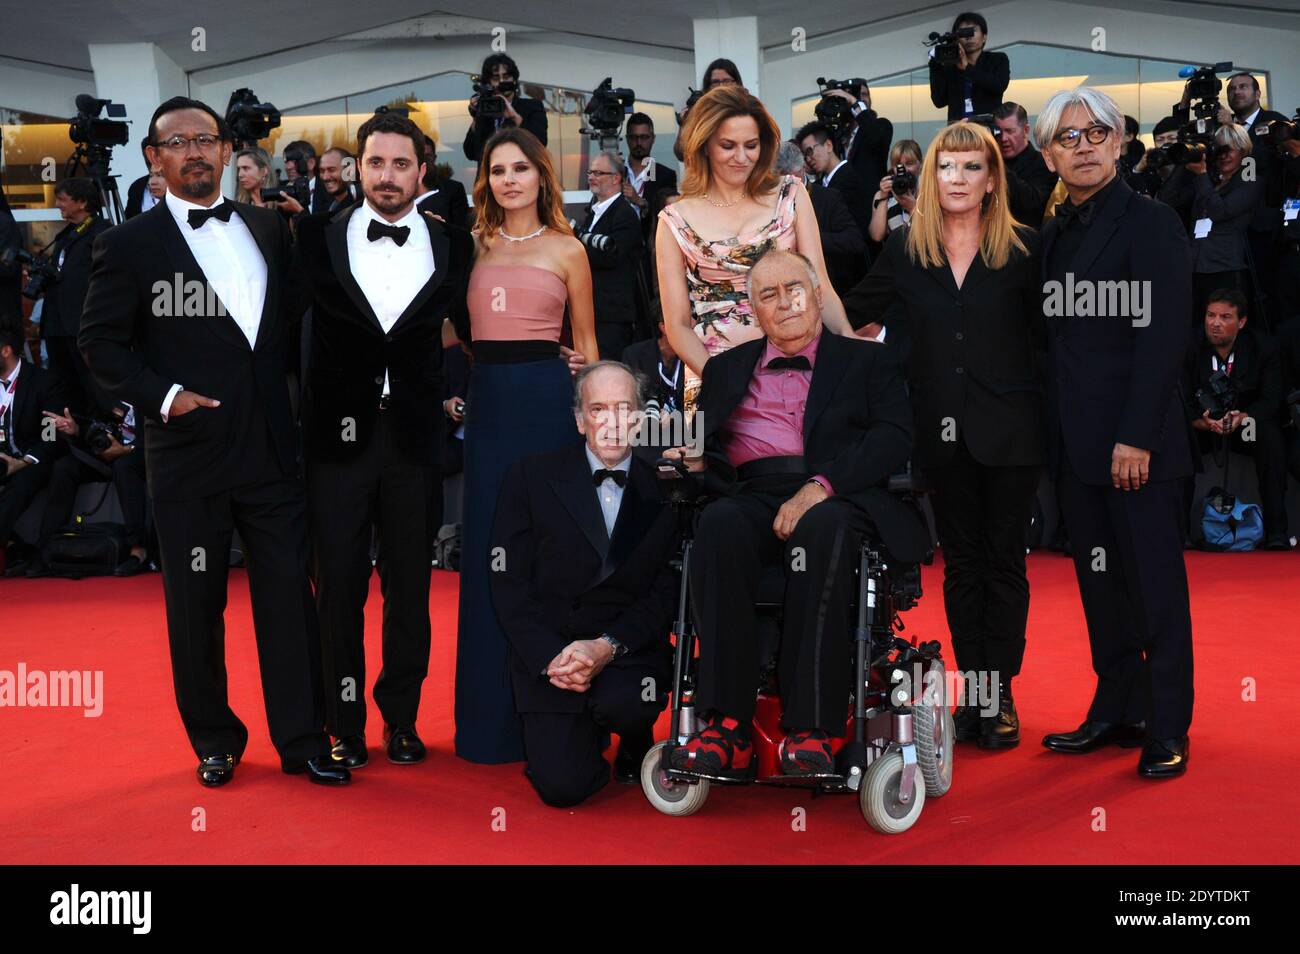 Japanese composer, musician and producer Ryuichi Sakamoto, British director Andrea Arnold, German actress Martina Gedeck, French actress Virginie Ledoyen, Chilean director, screenwriter and producer Pablo Larrain, Chinese actor and director Jiang Wen, Italian director and president of the jury Bernardo Bertolucci and Swiss French director of photography Renato Berta attending the Closing Ceremony of the 70th Venice International Film Festival (Mostra), at Lido island in Venice, Italy, on September 07, 2013. Photo by Aurore Marechal/ABACAPRESS.COM Stock Photo